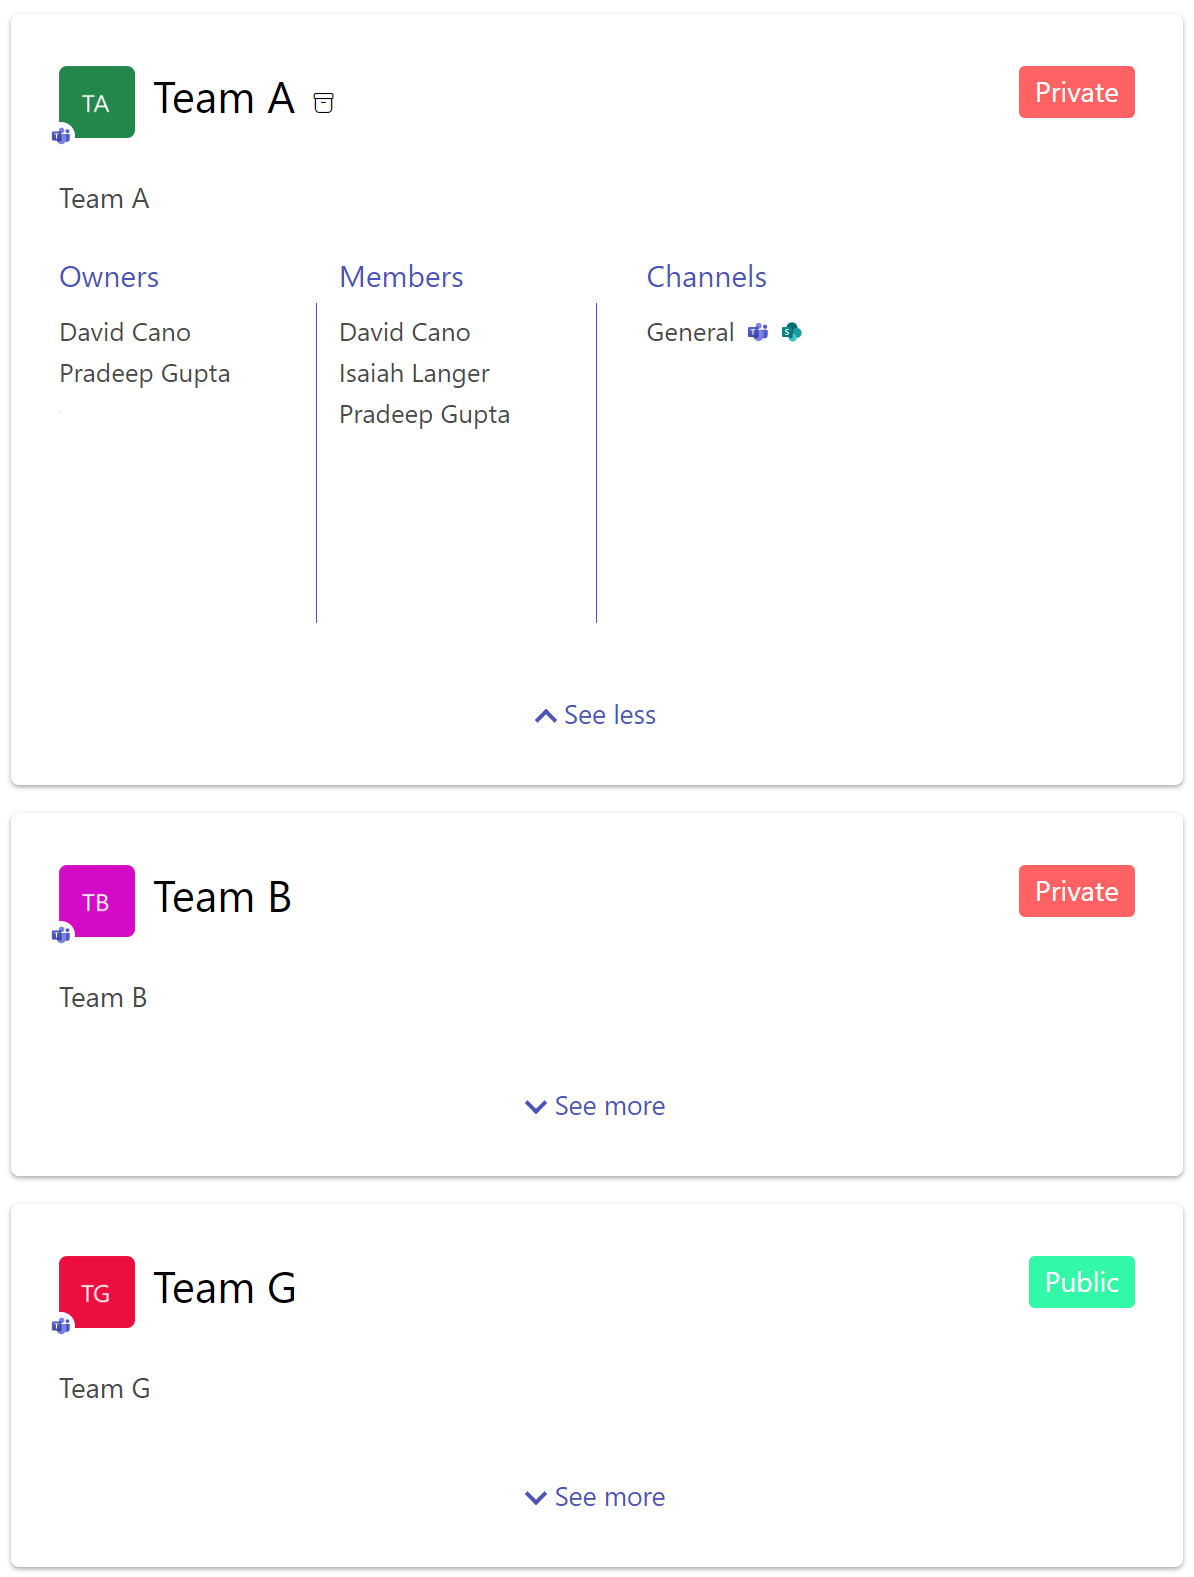 "Teams Layout - Overview"